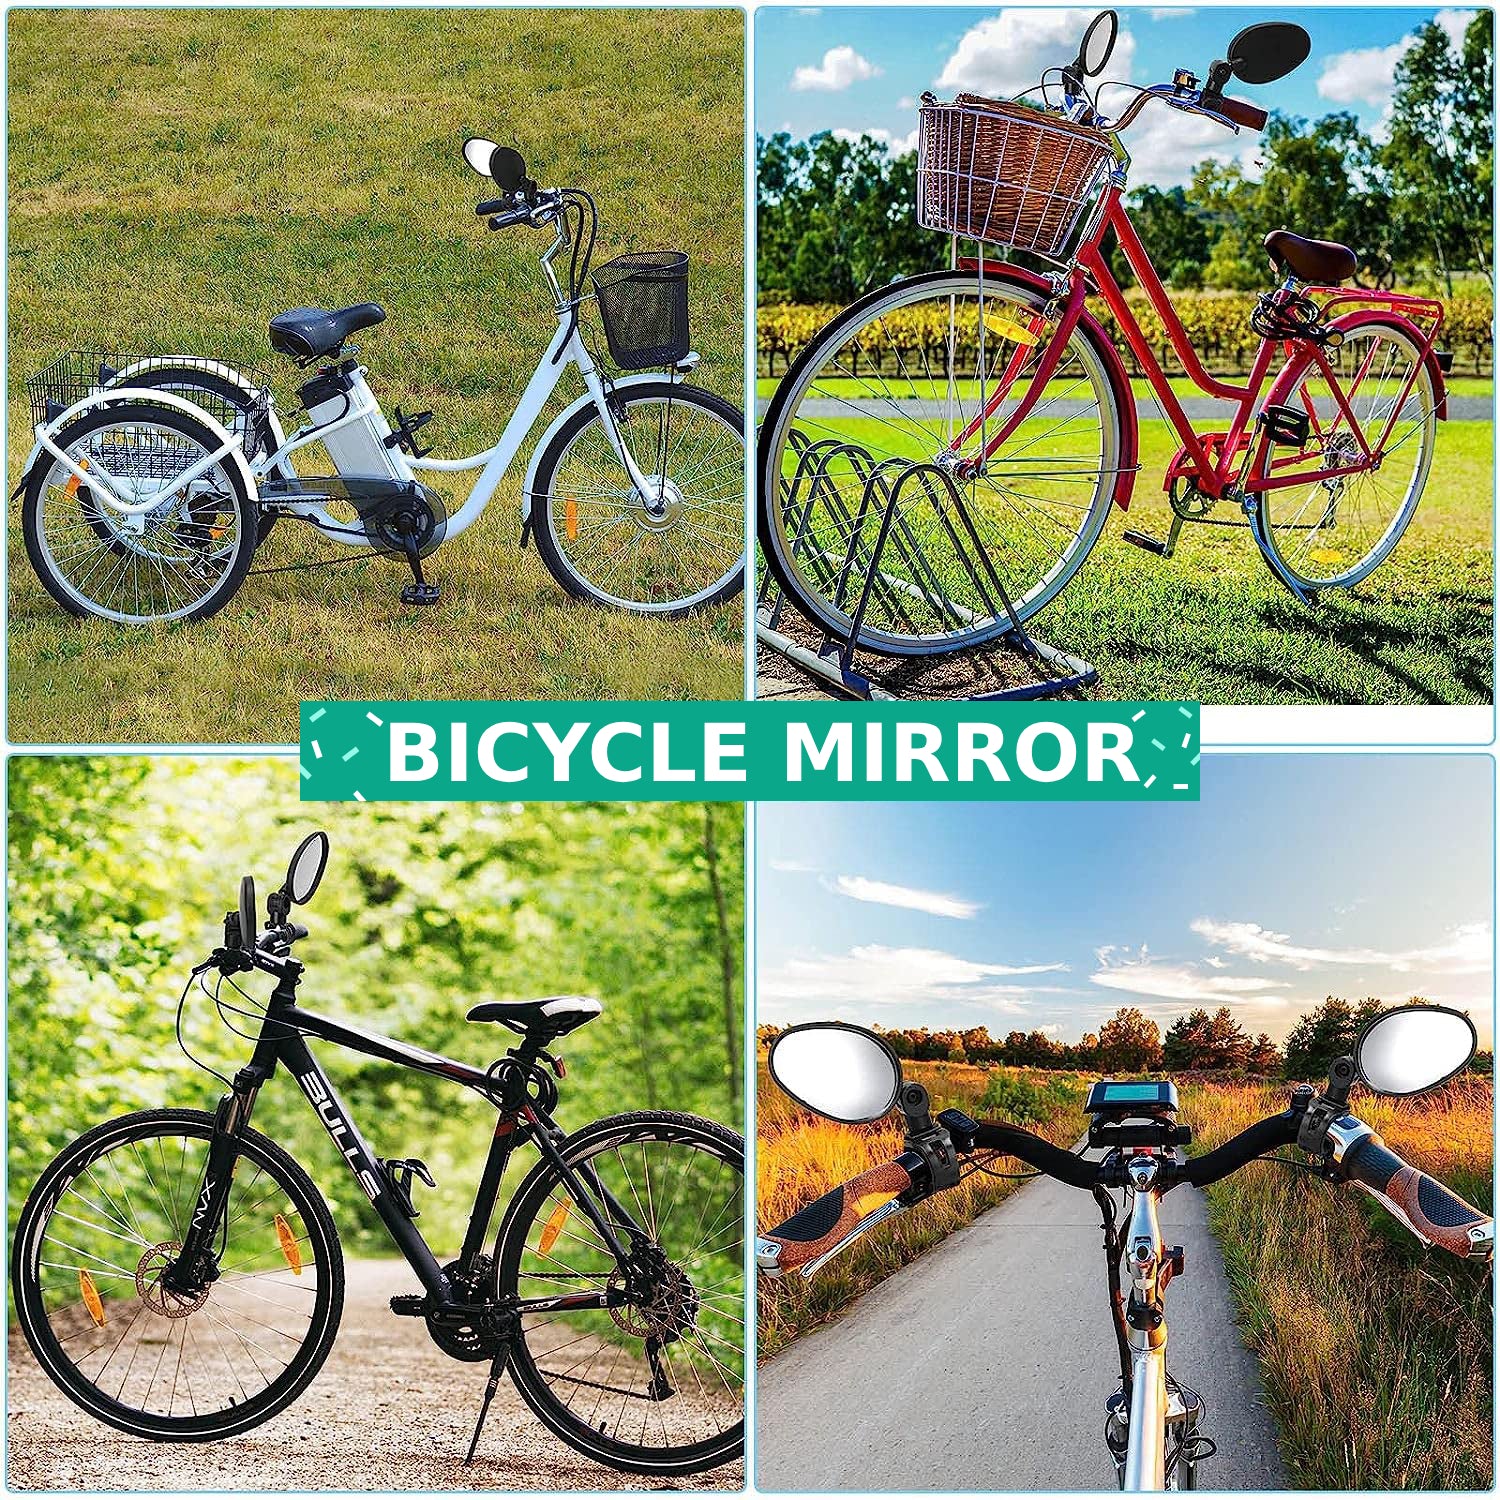 BICYCLE MIRROR